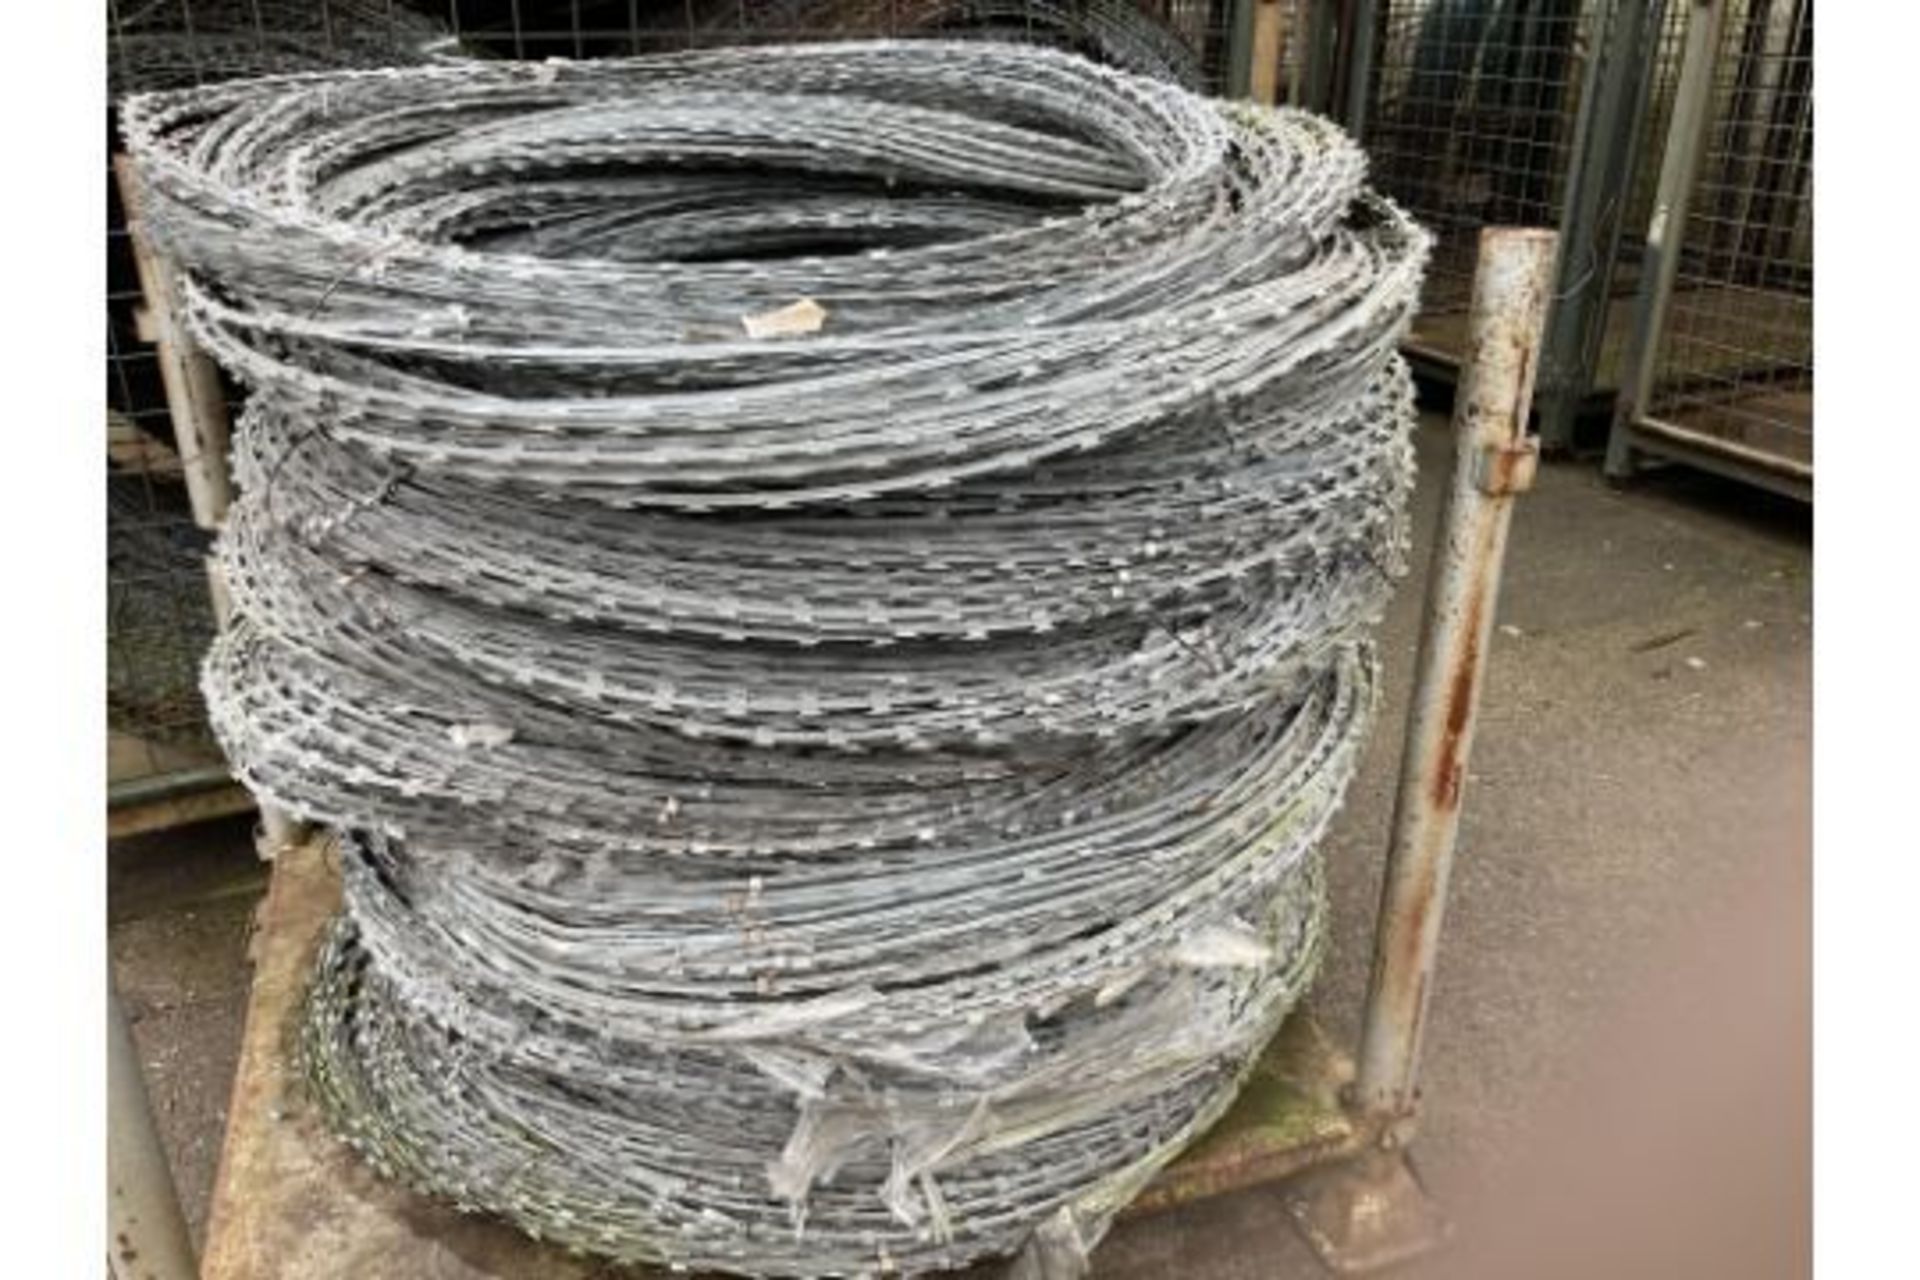 MOD stock 20 + bundles of galvanised razor wire. 1m concertina coils stretches to approx. 40 m